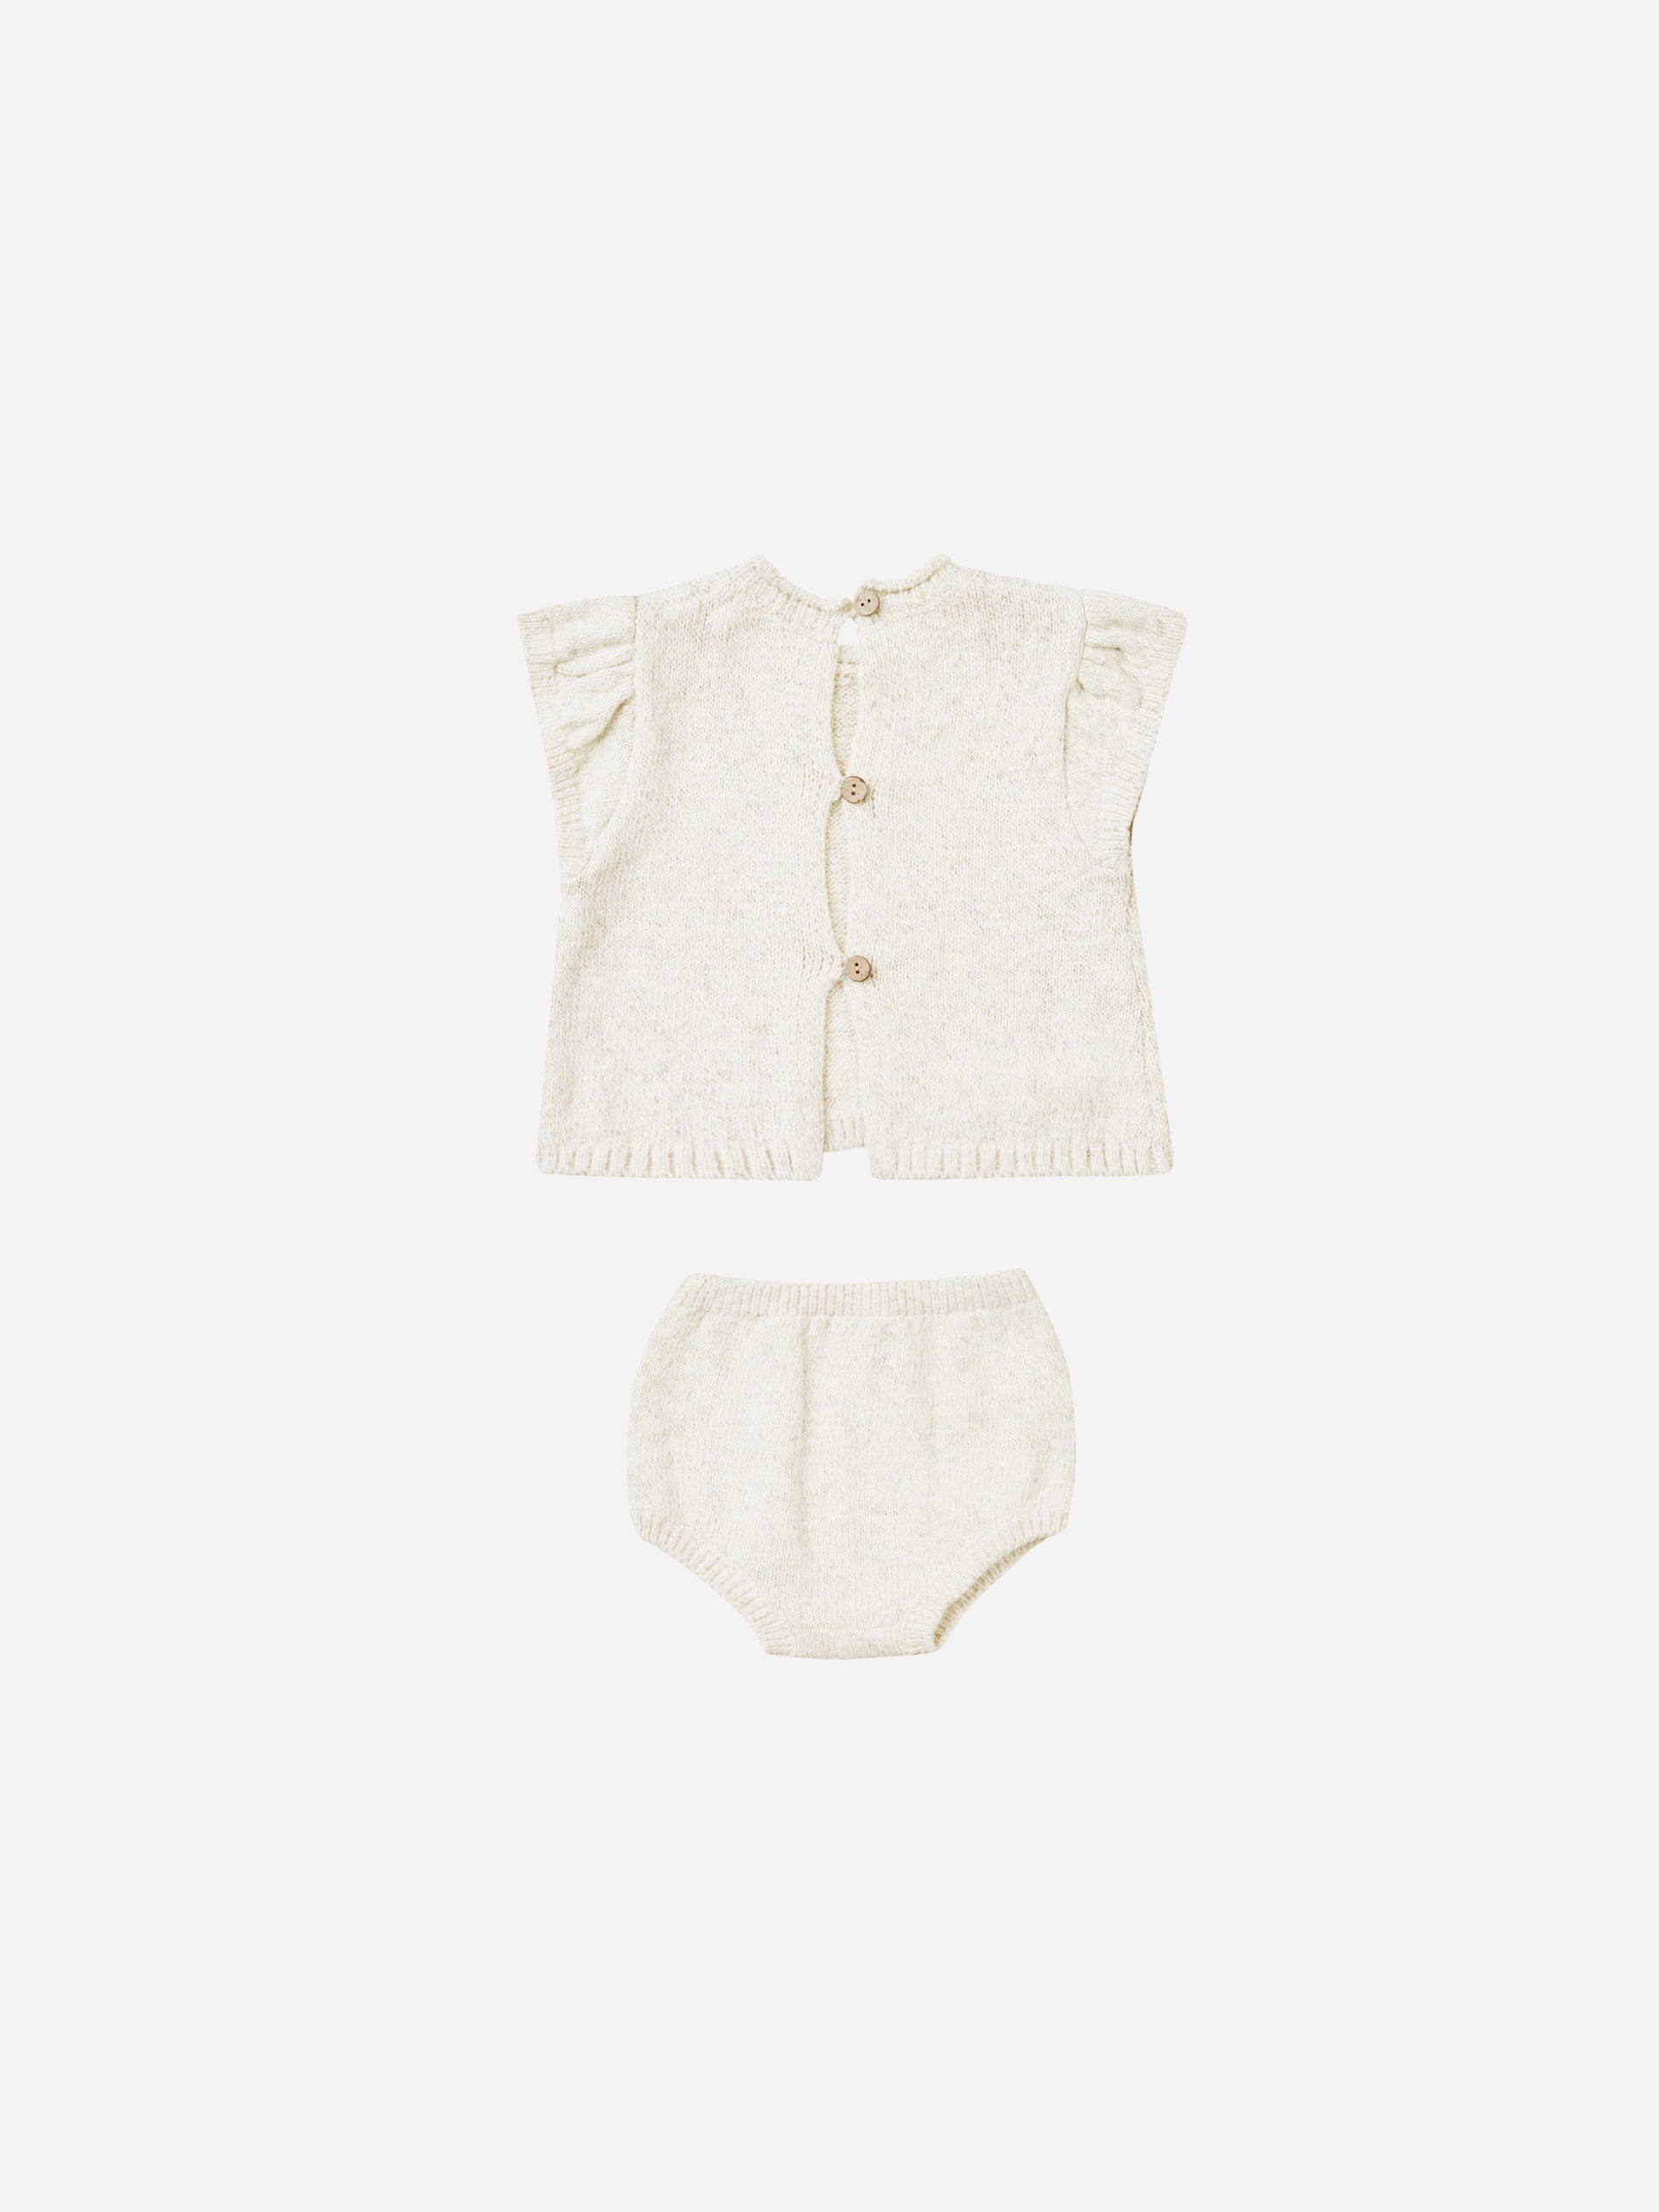 Penny Knit Set || Ivory - Rylee + Cru | Kids Clothes | Trendy Baby Clothes | Modern Infant Outfits |